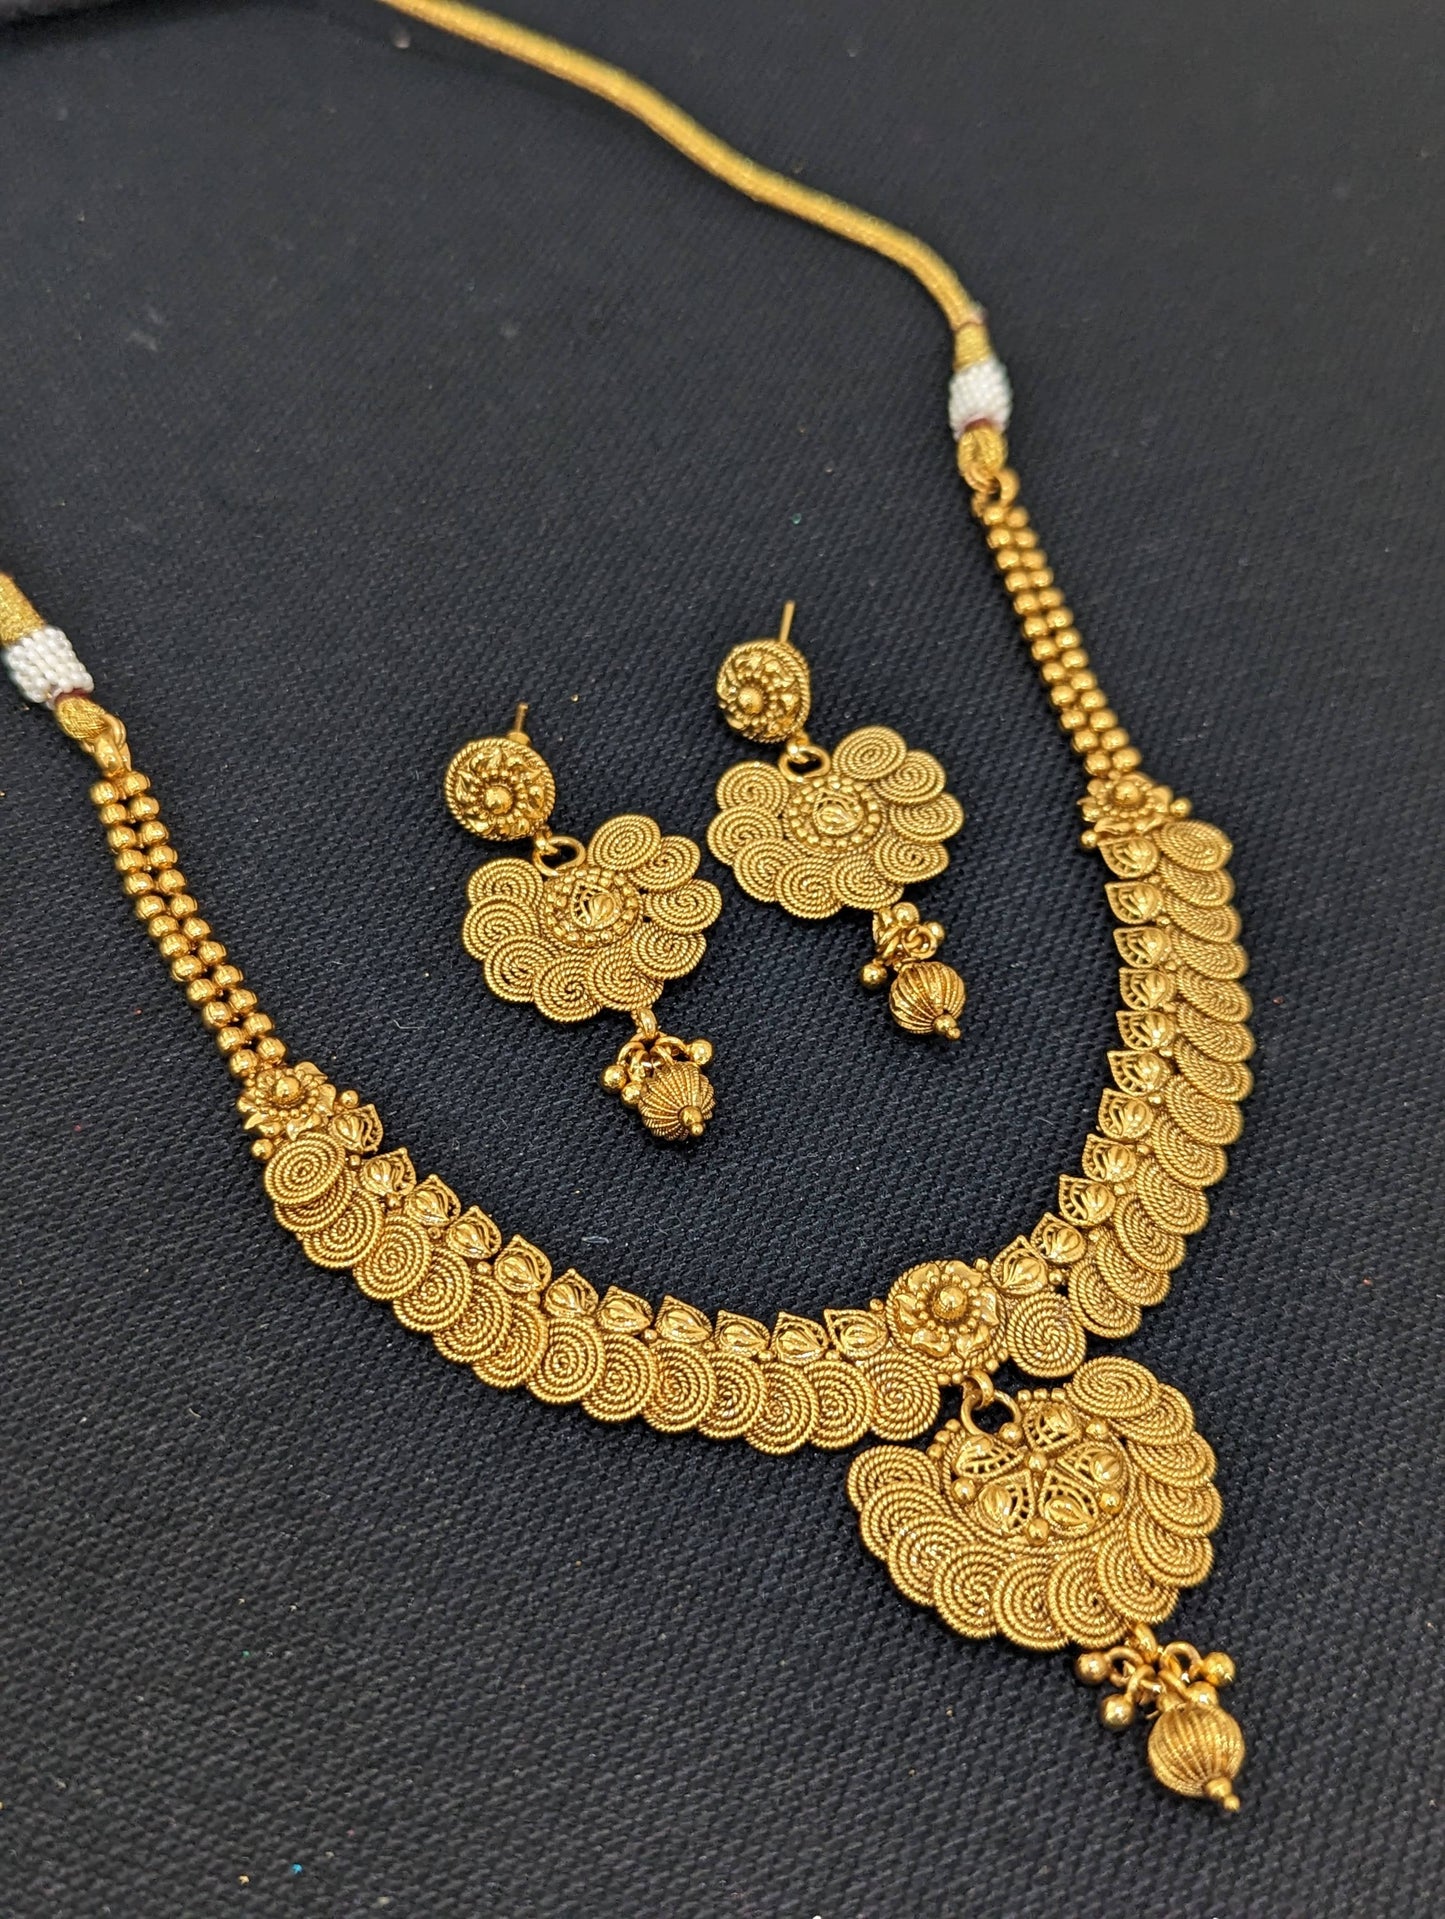 Real gold look alike Choker Necklace and Earrings set - Design 3